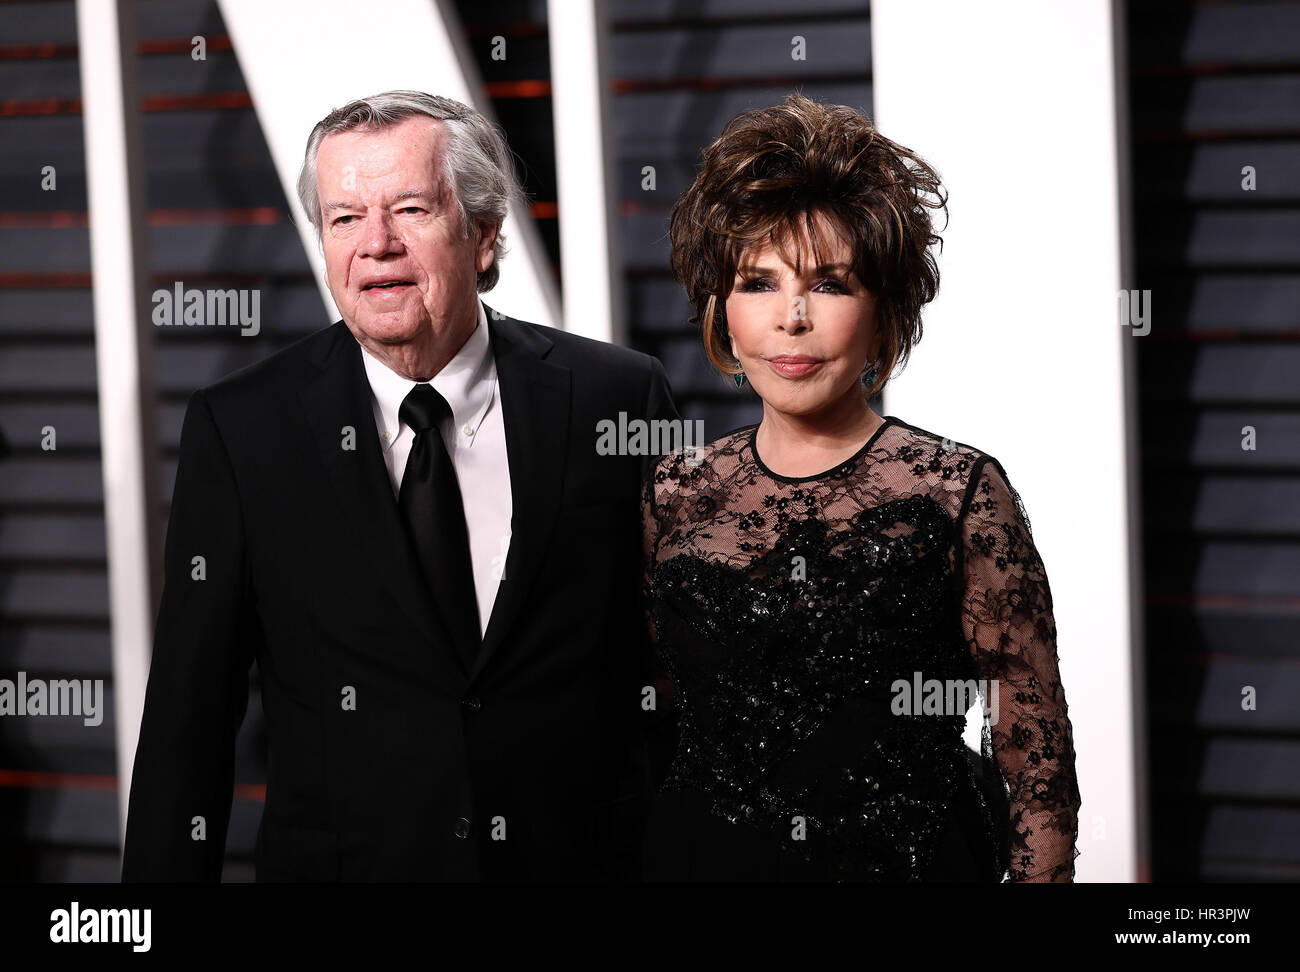 Beverly Hills, California, USA. 26th Feb, 2017. Robert A. Daly (L) and Carole Bayer Sager attend the Vanity Fair Oscar Party 2017 on February 26, 2017 in Beverly Hills, California. Credit: Mpi99/Media Punch/Alamy Live News Stock Photo